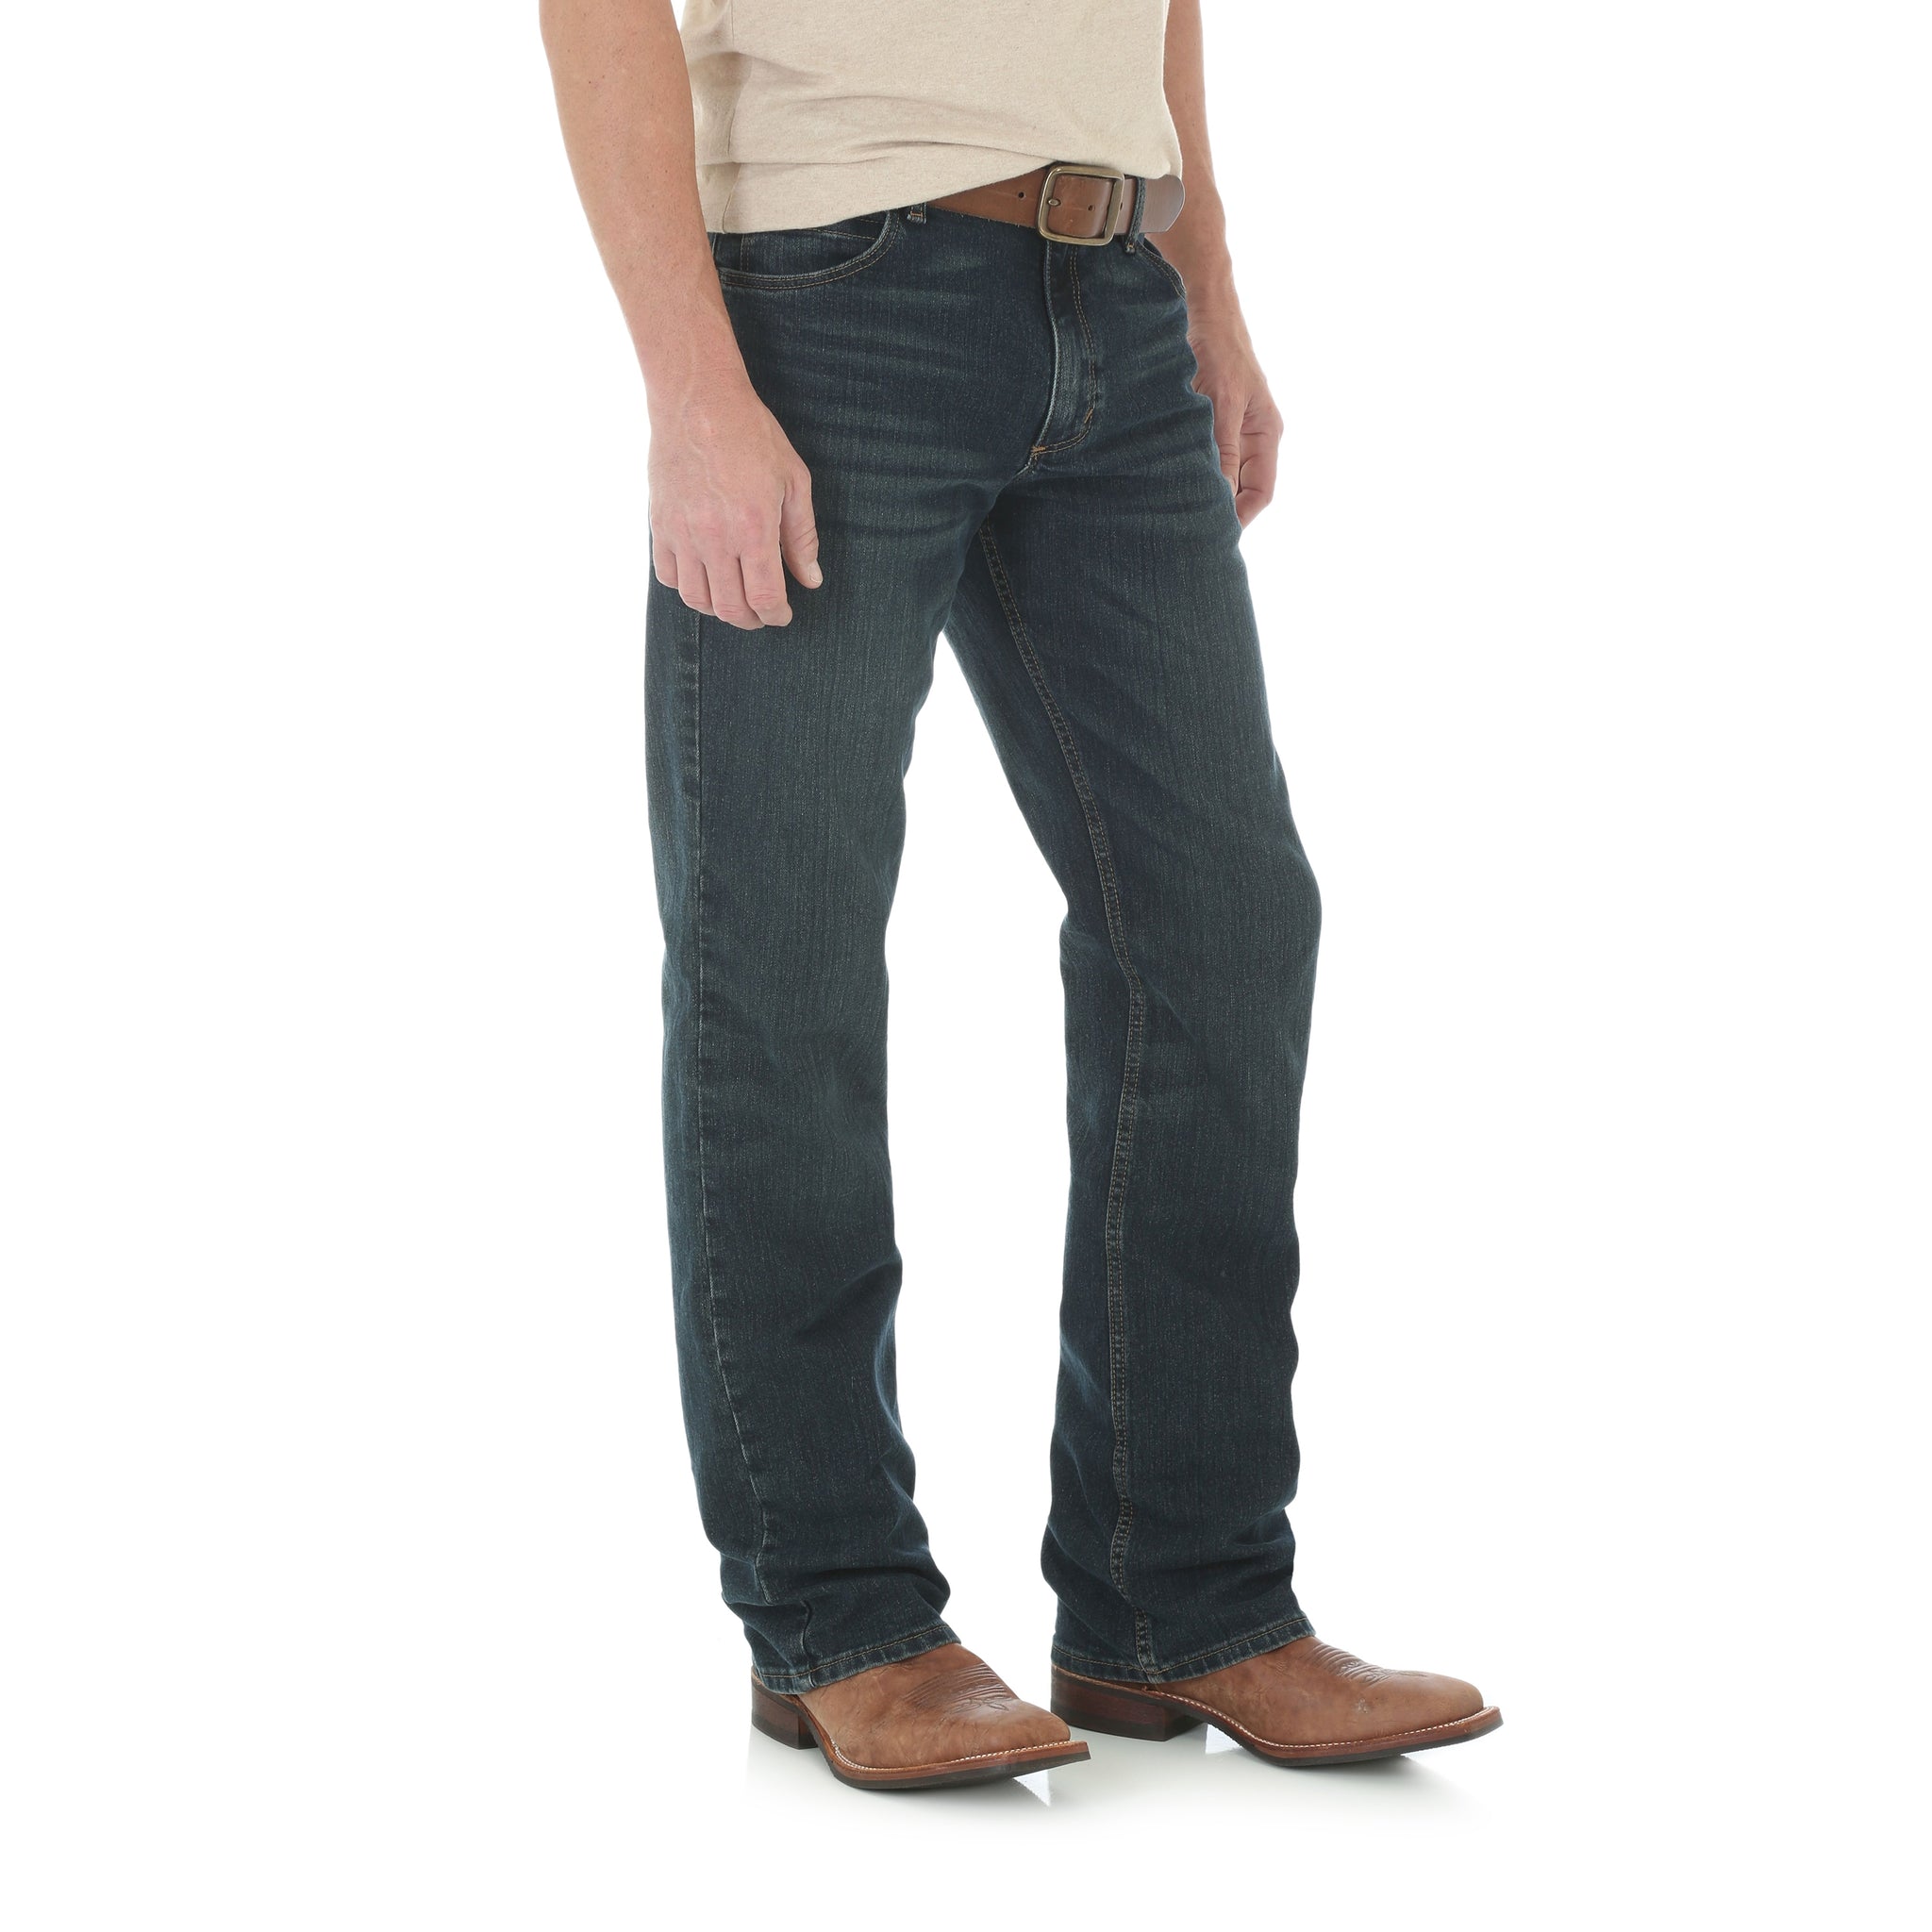 02 Competition Slim Fit Men's Jean by Wrangler – Stone Creek Western Shop